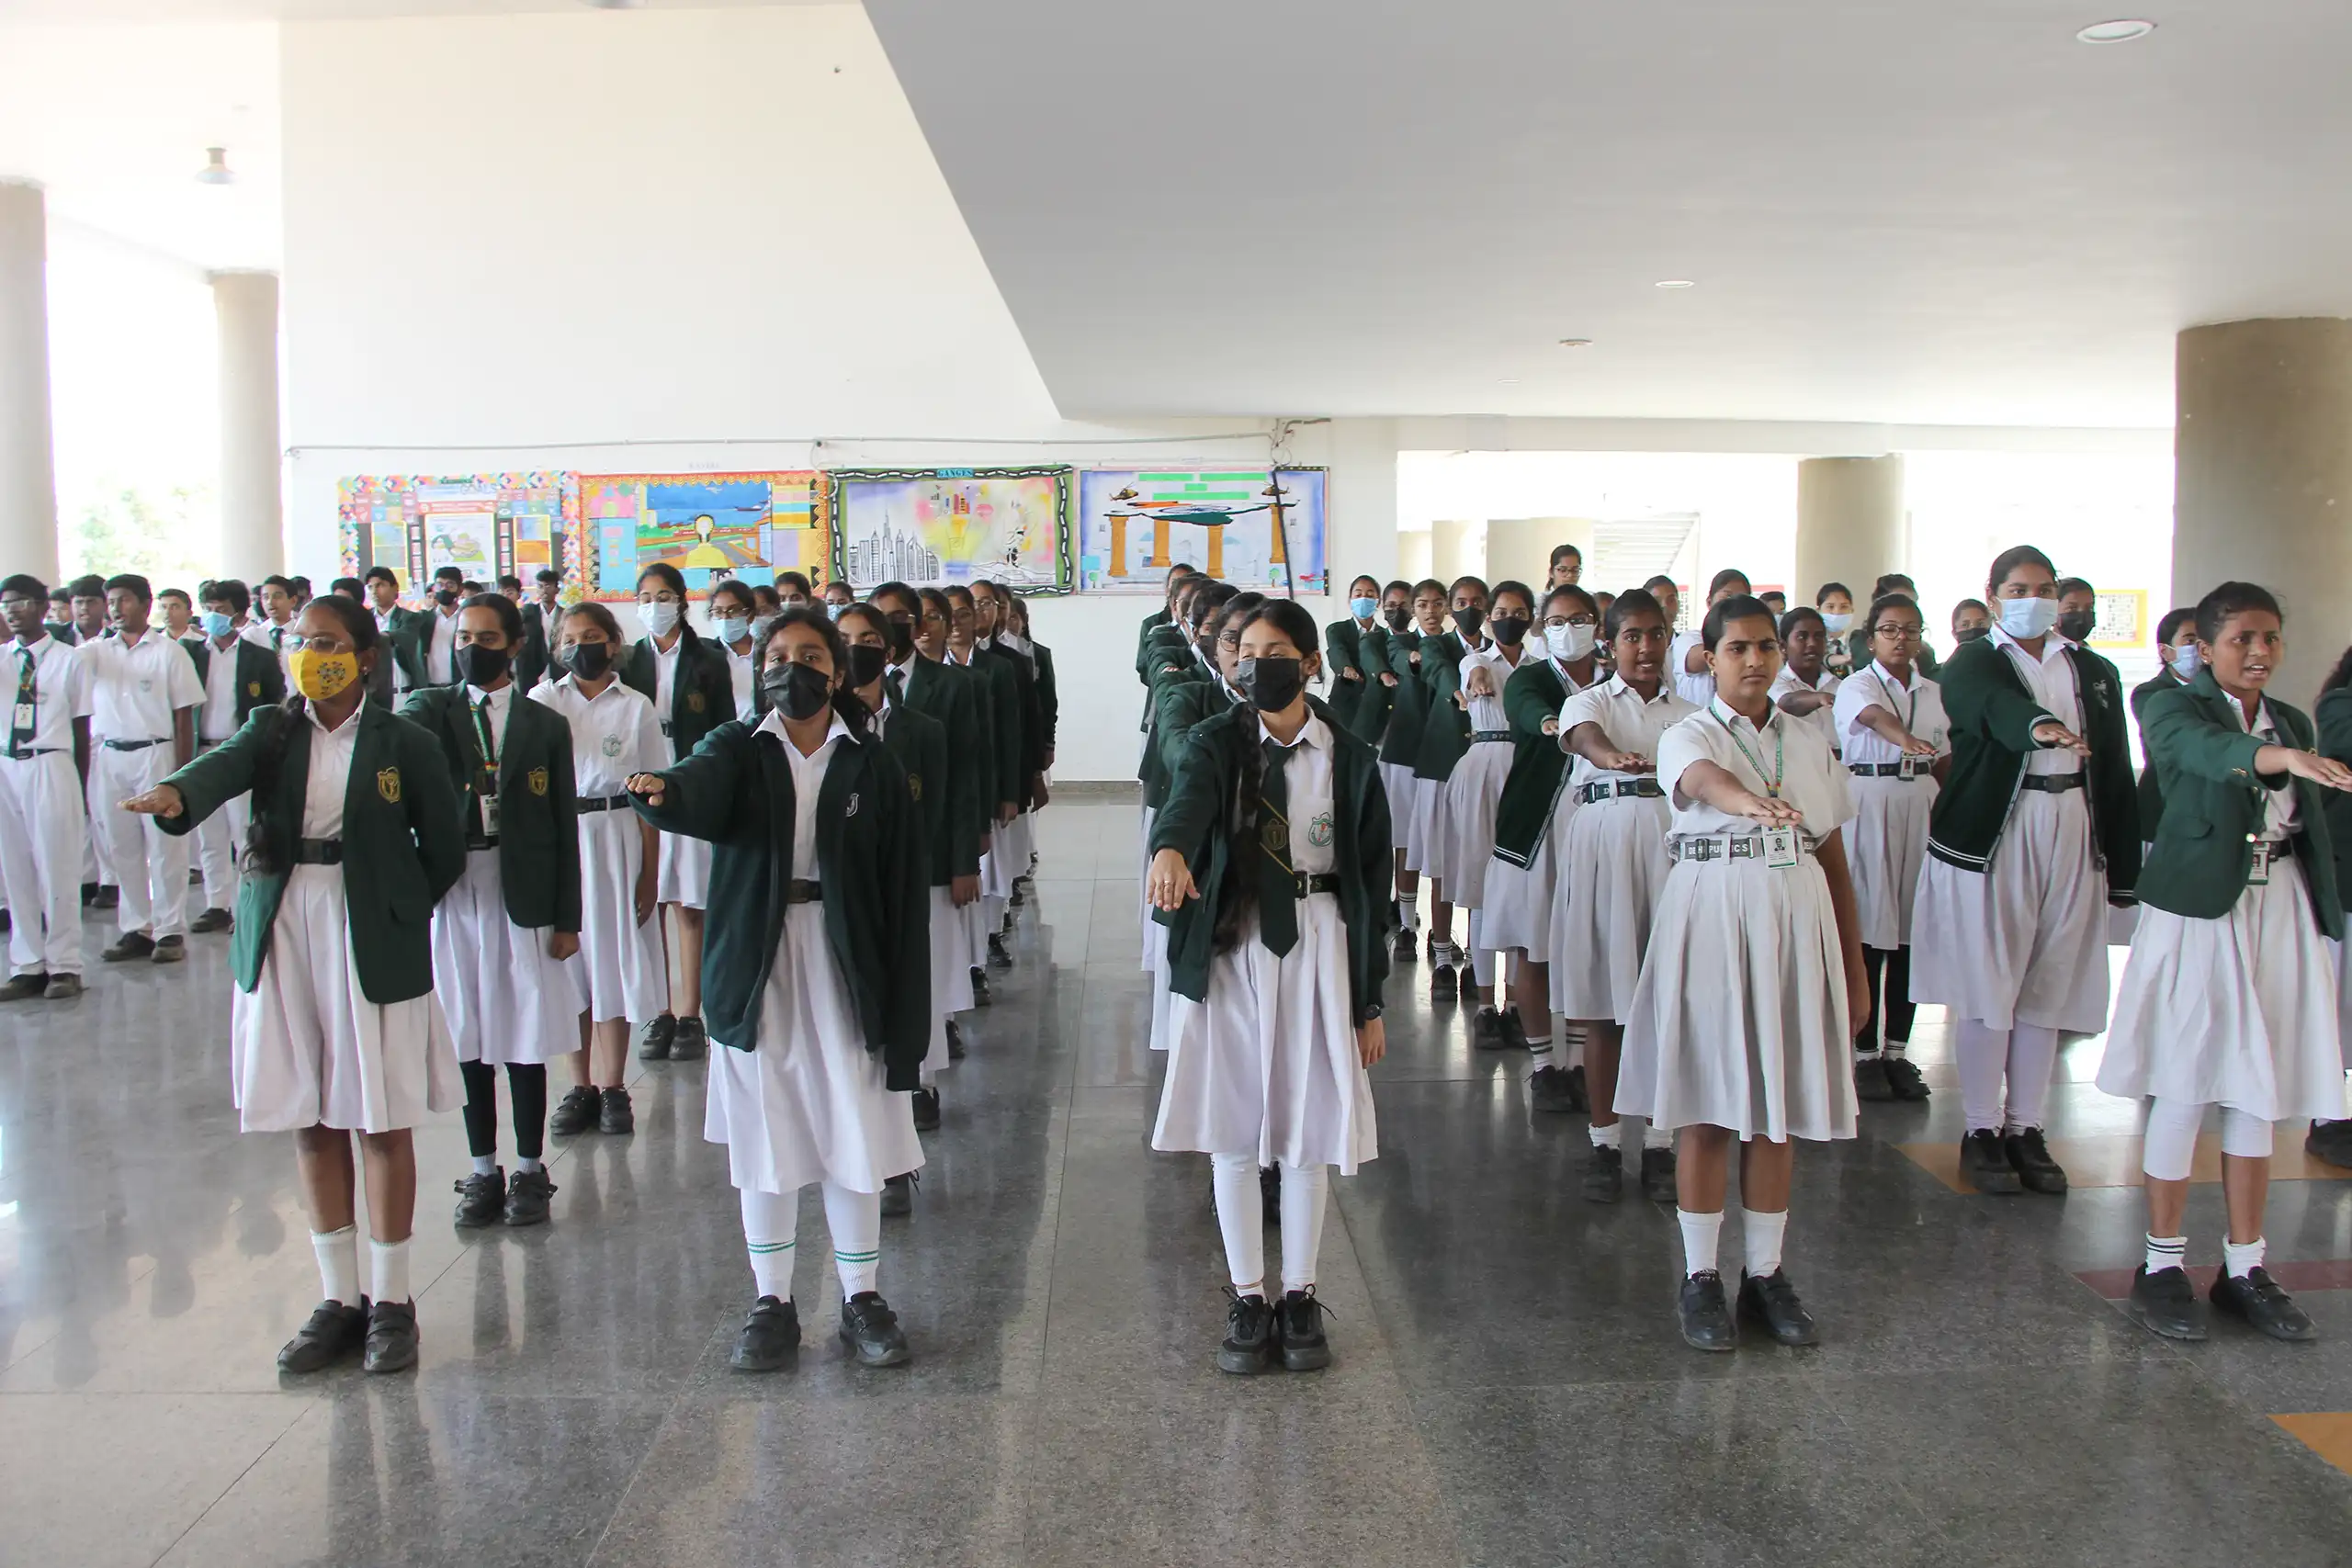 Students taking pledge together during National Constitution Day celebration at DPS Warangal.